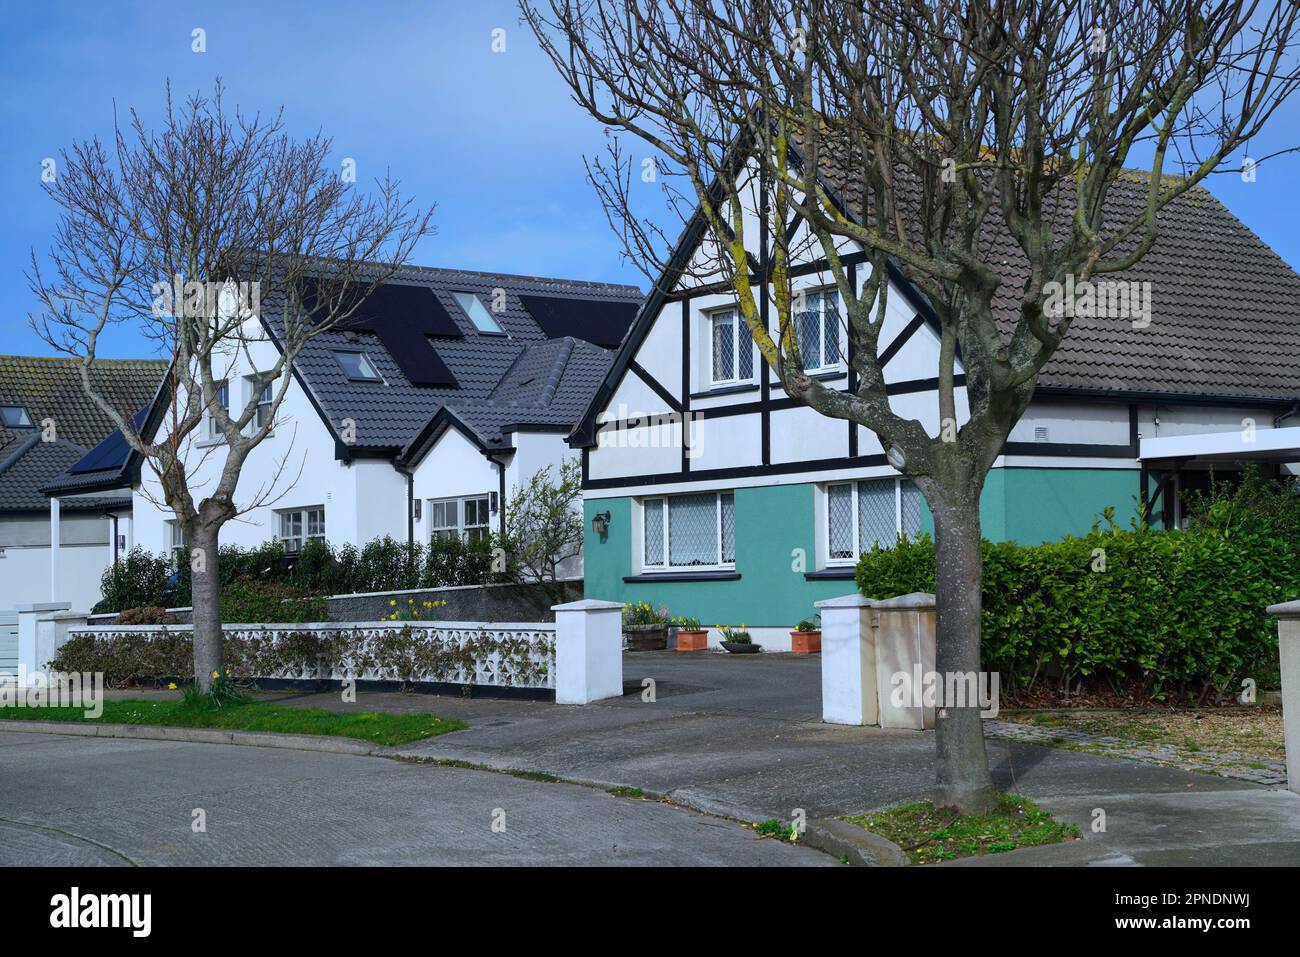 Suburban street with detached stucco houses with gables Stock Photo